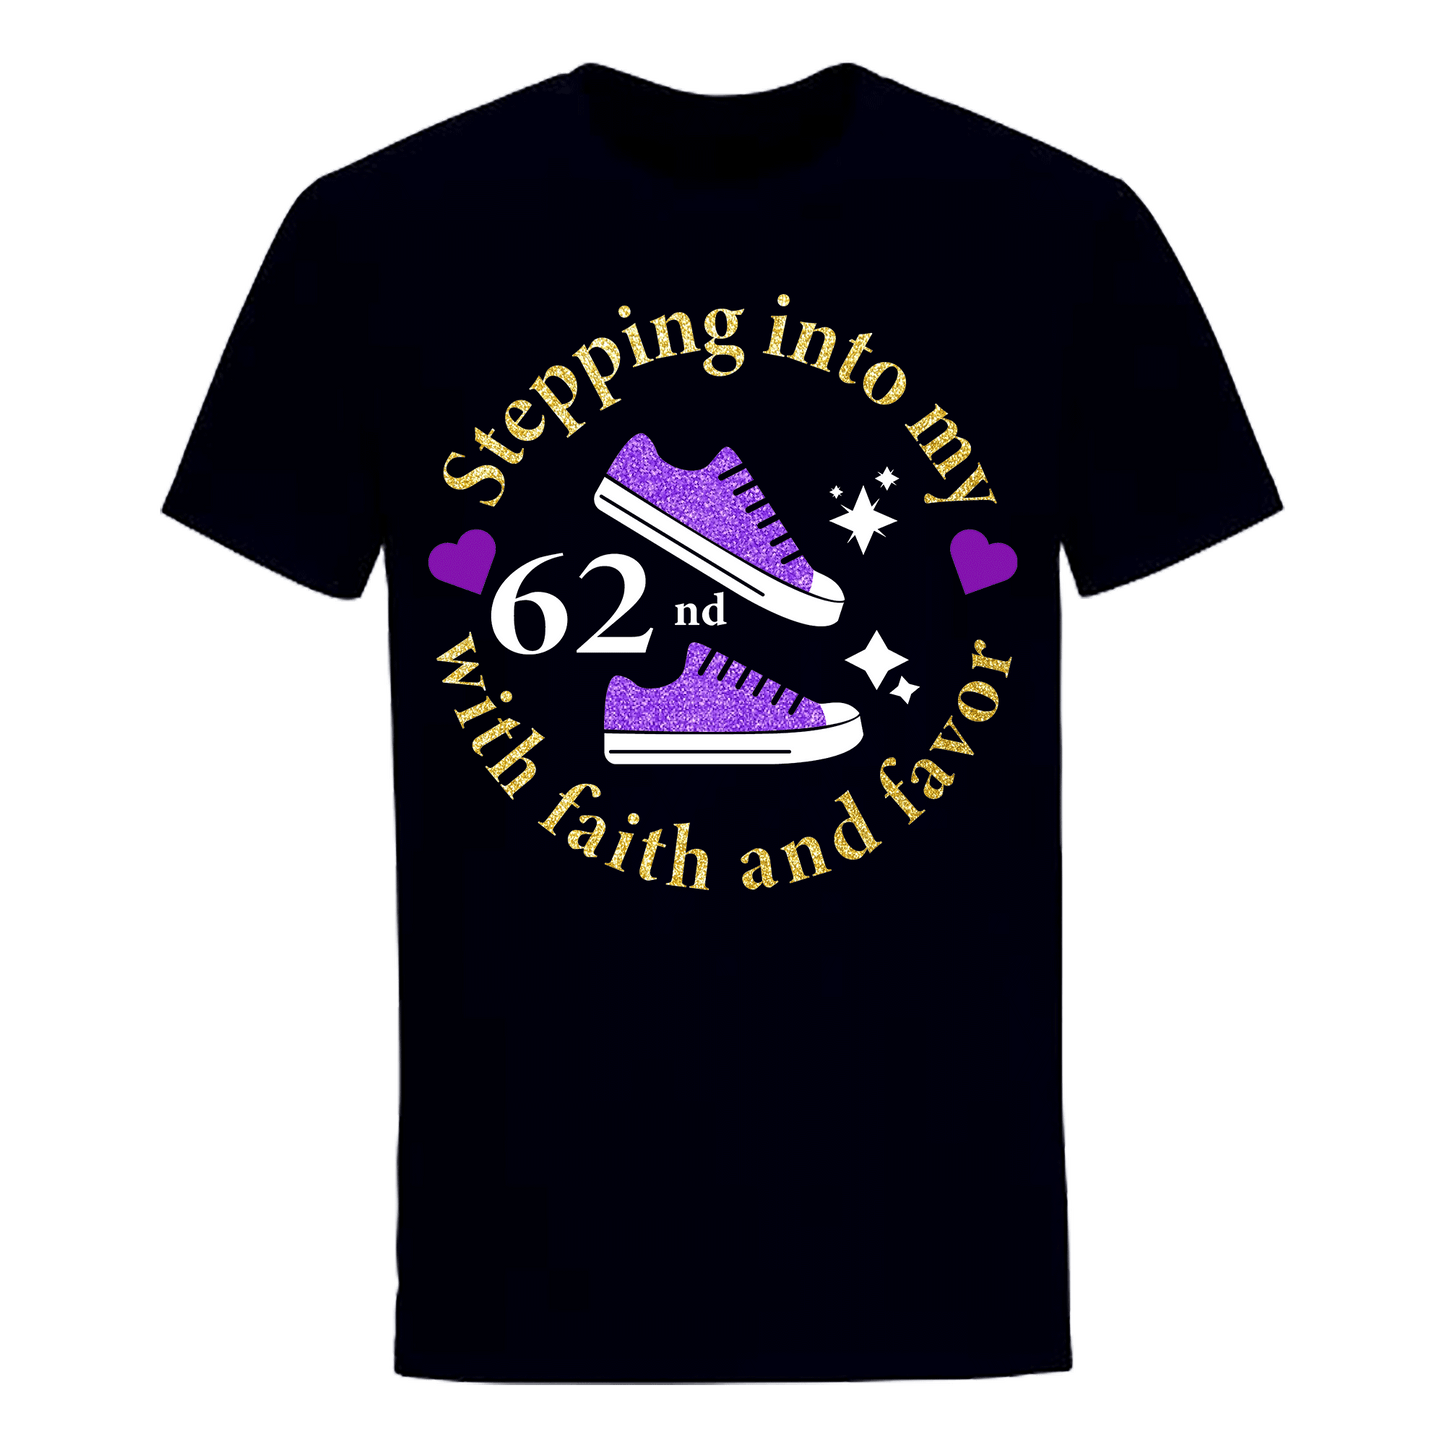 STEPPING INTO 62ND WITH FAITH & FAVOR UNISEX SHIRT